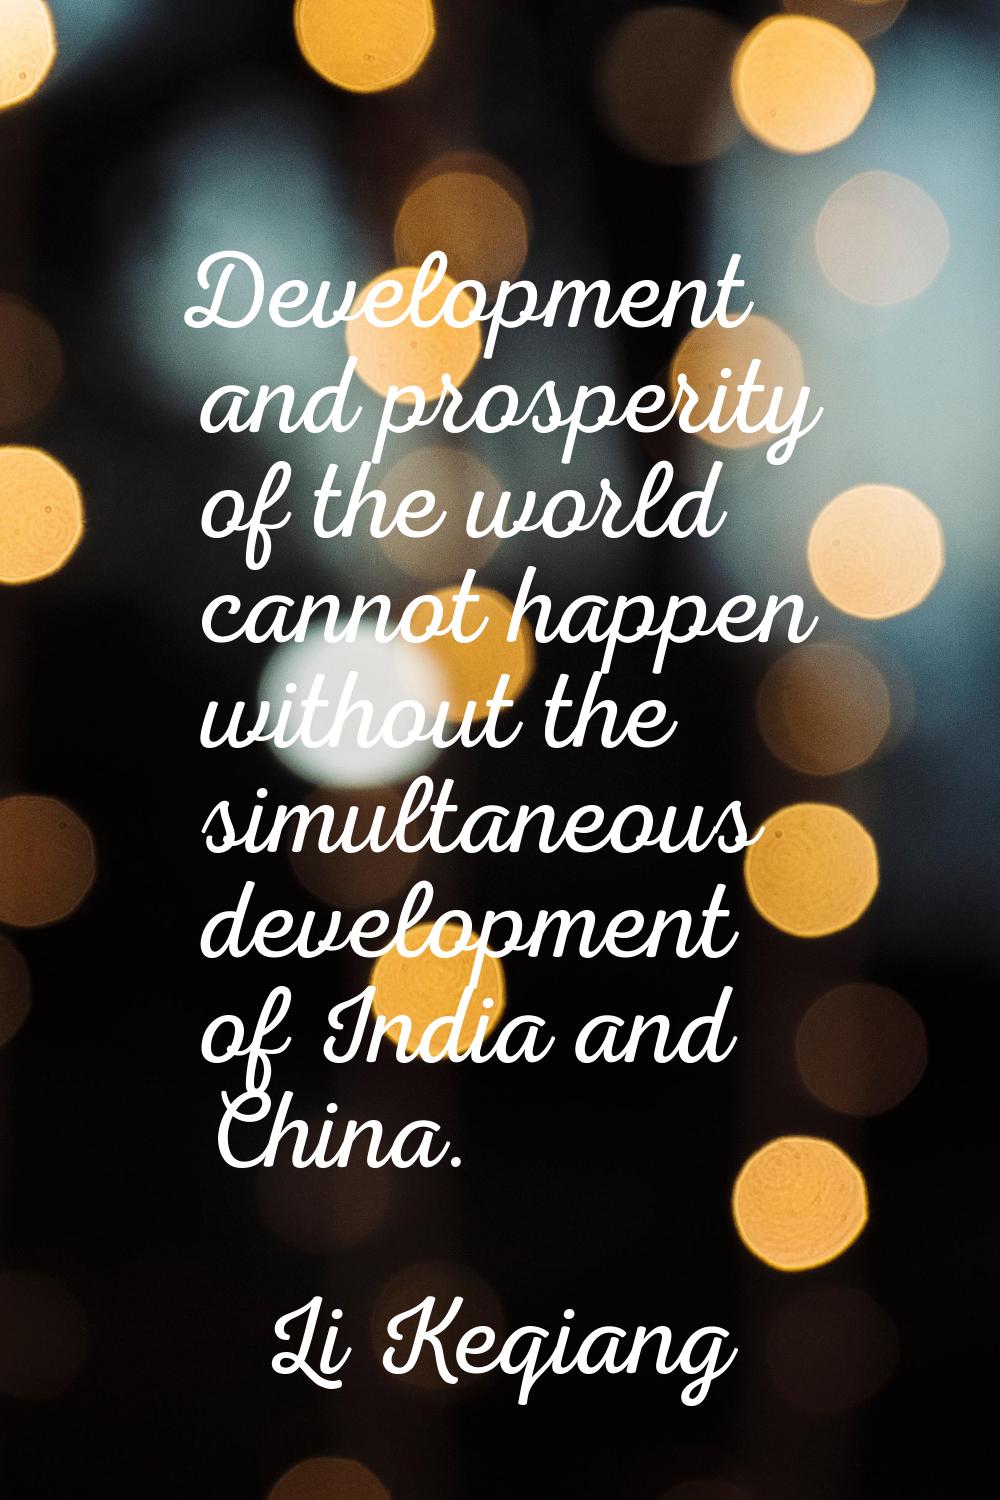 Development and prosperity of the world cannot happen without the simultaneous development of India